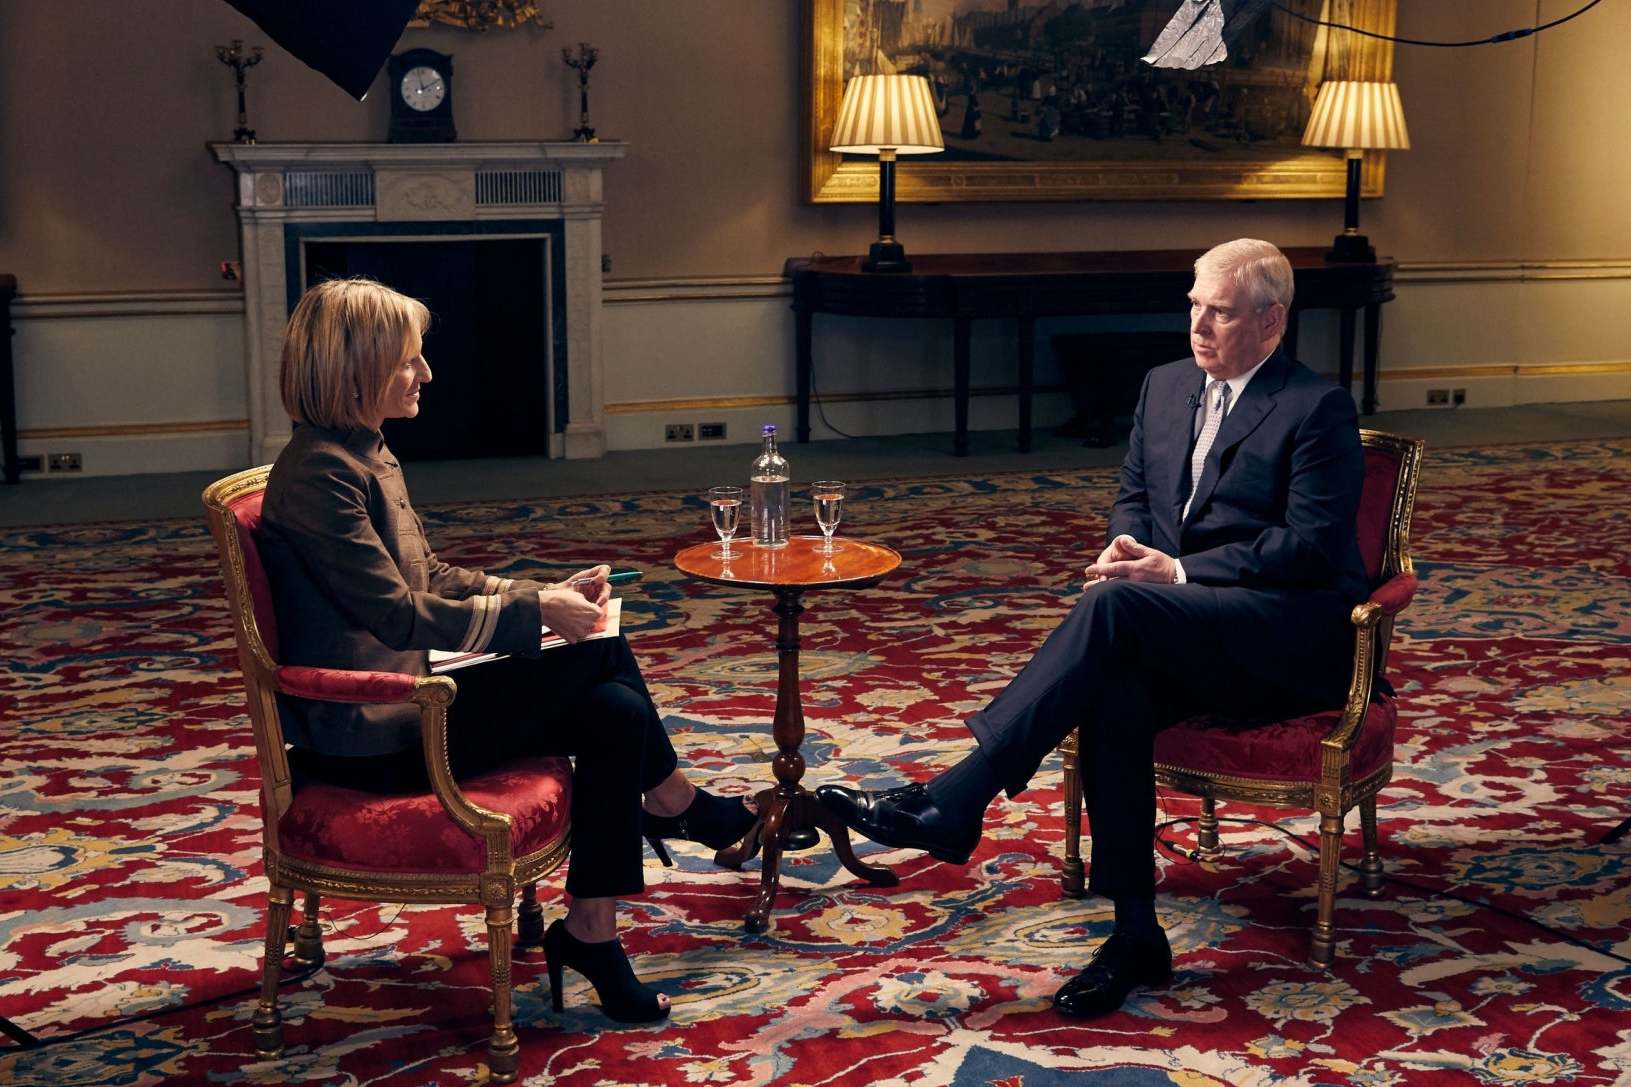 emily maitlis, amazon, scandal, ruth wilson, duke of york, the crown, michael sheen, amazon, michael sheen to star as prince andrew alongside ruth wilson in amazon drama based on newsnight interview